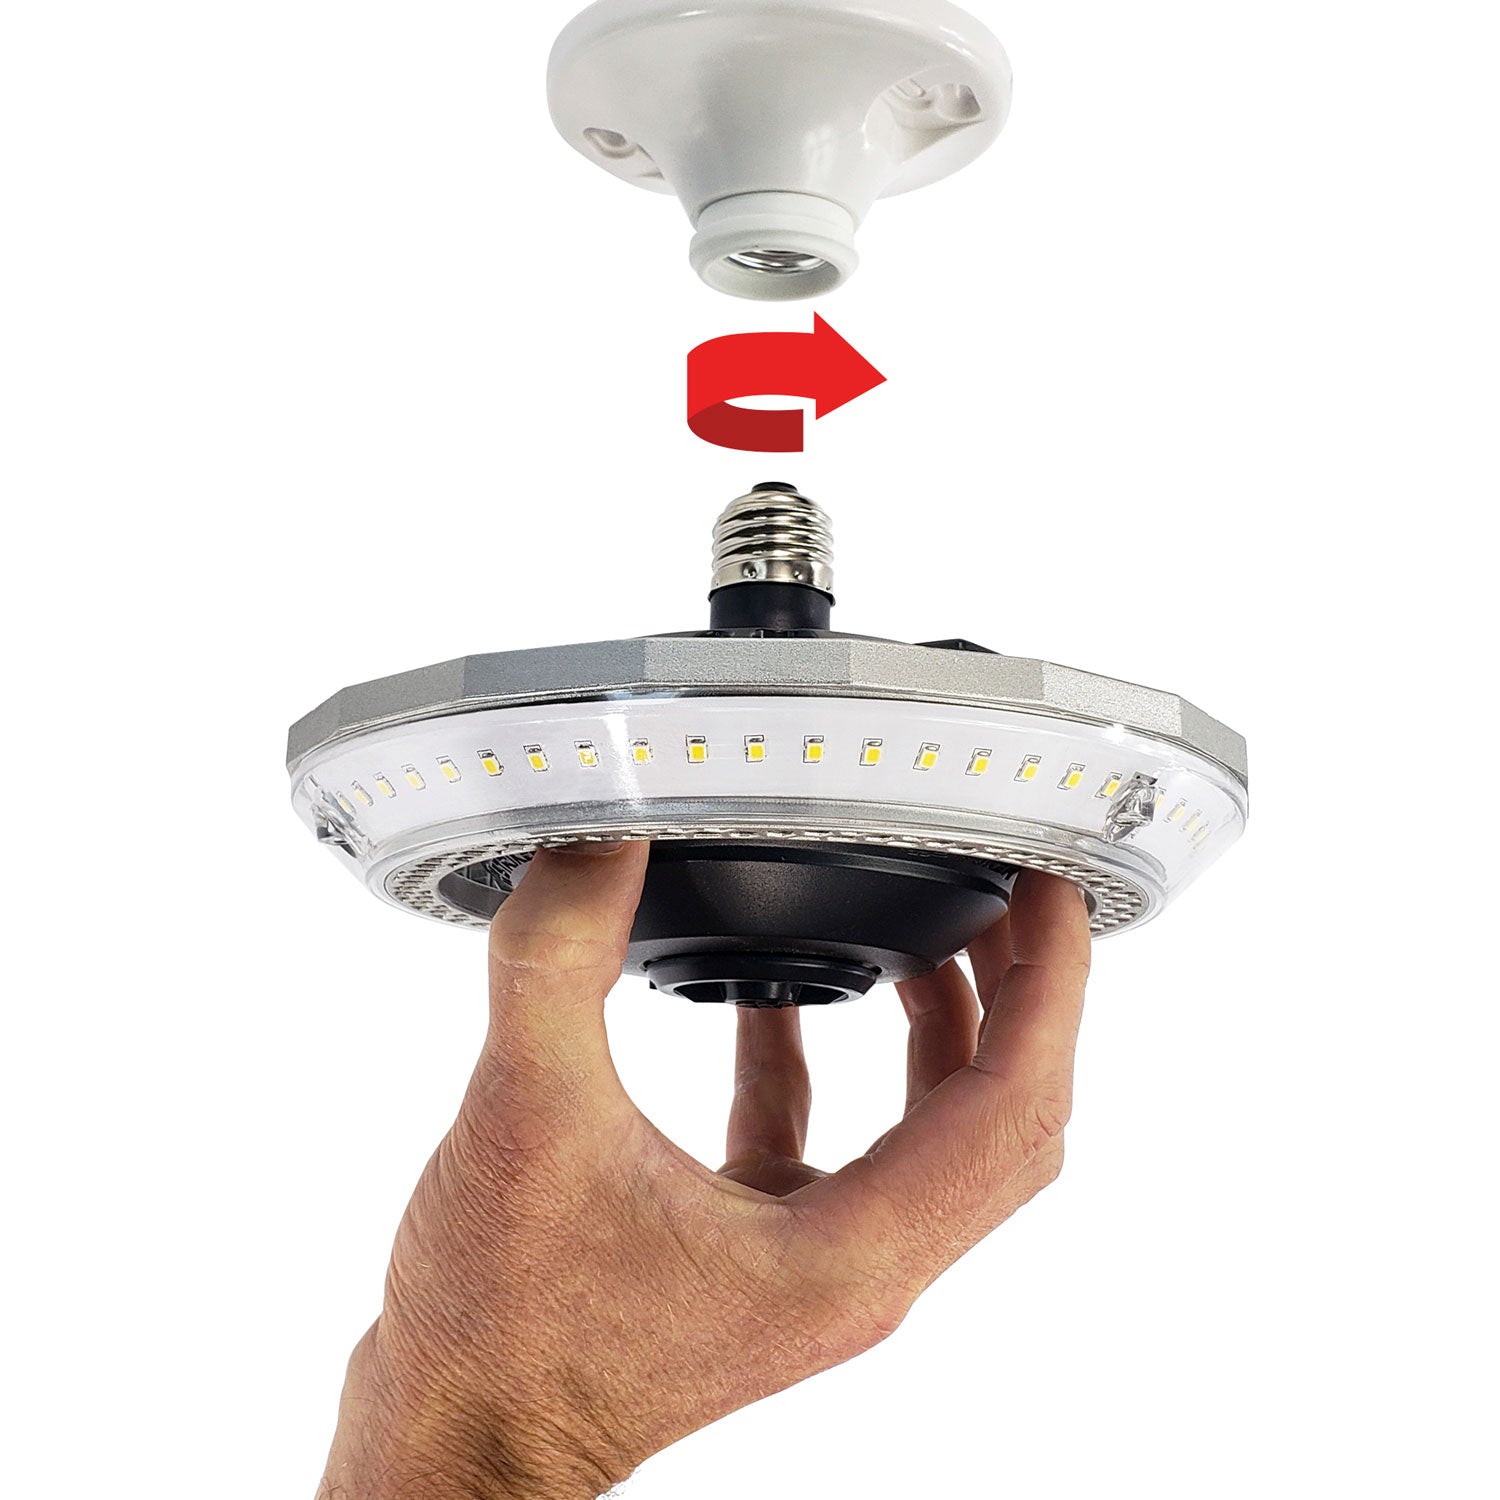 MPI Motion Activated Garage Ceiling Light - Multi LED Lights in one - Easy Installation